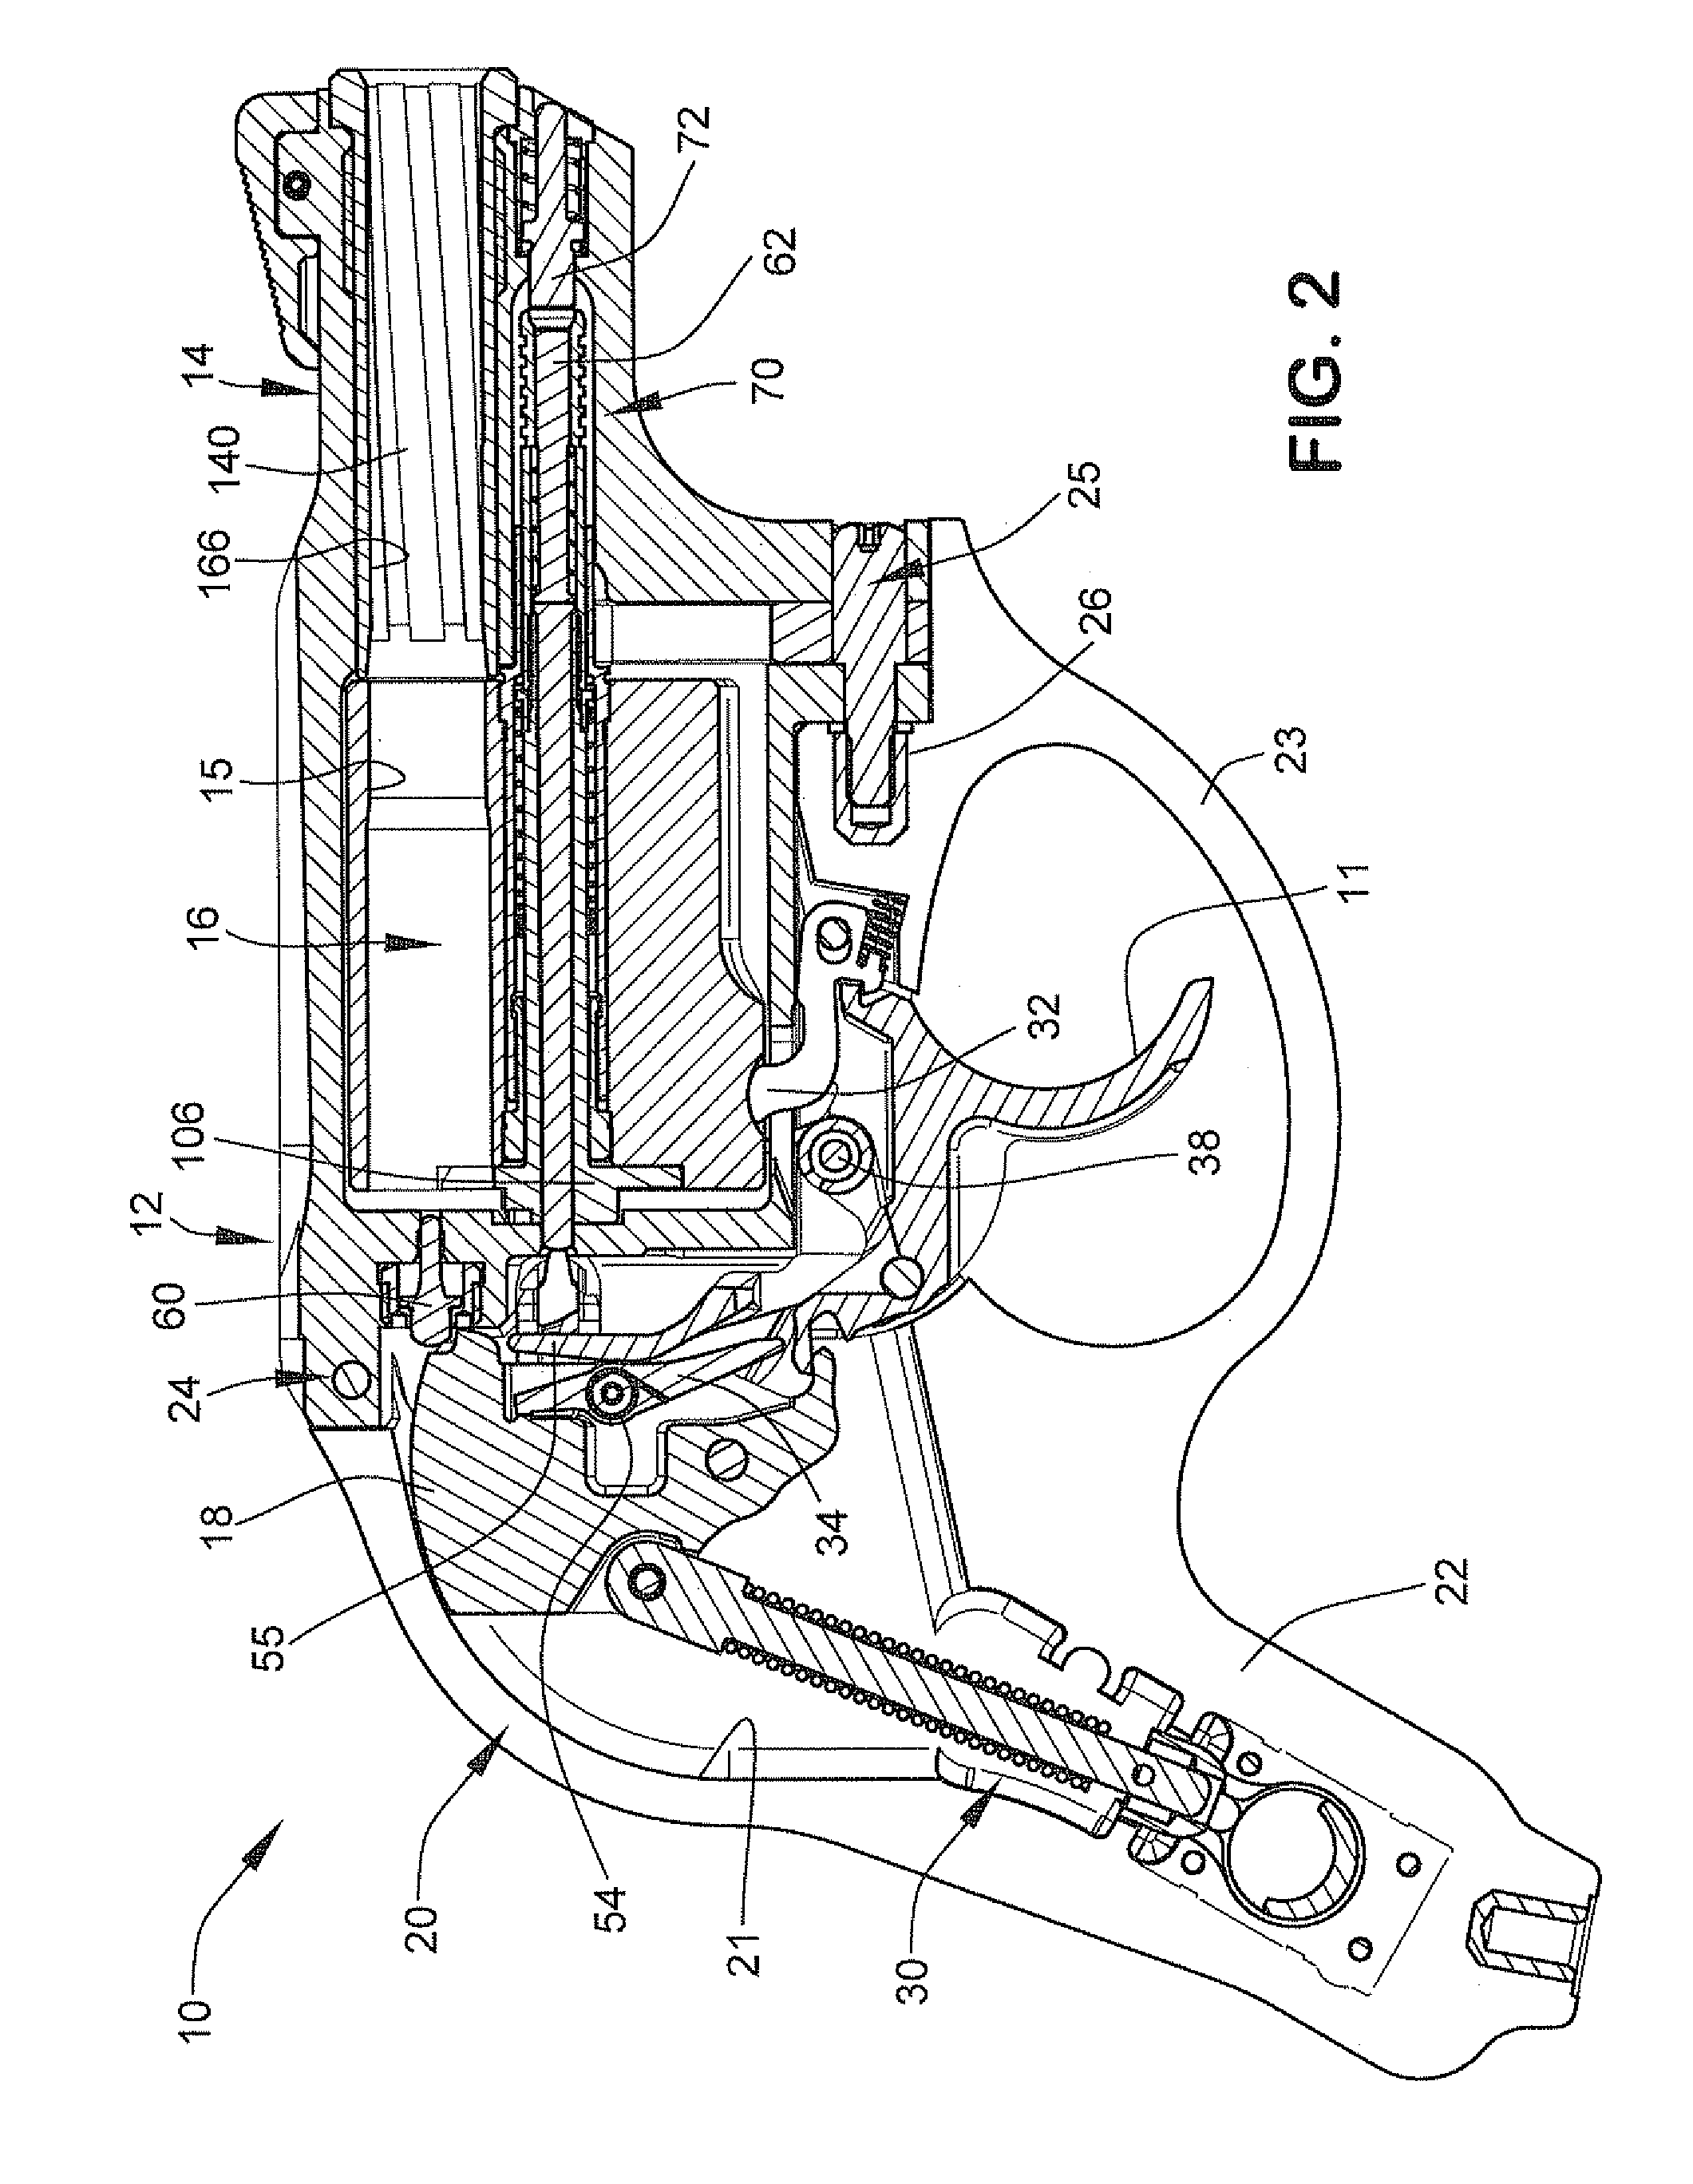 Cylinder latching mechanism for revolver